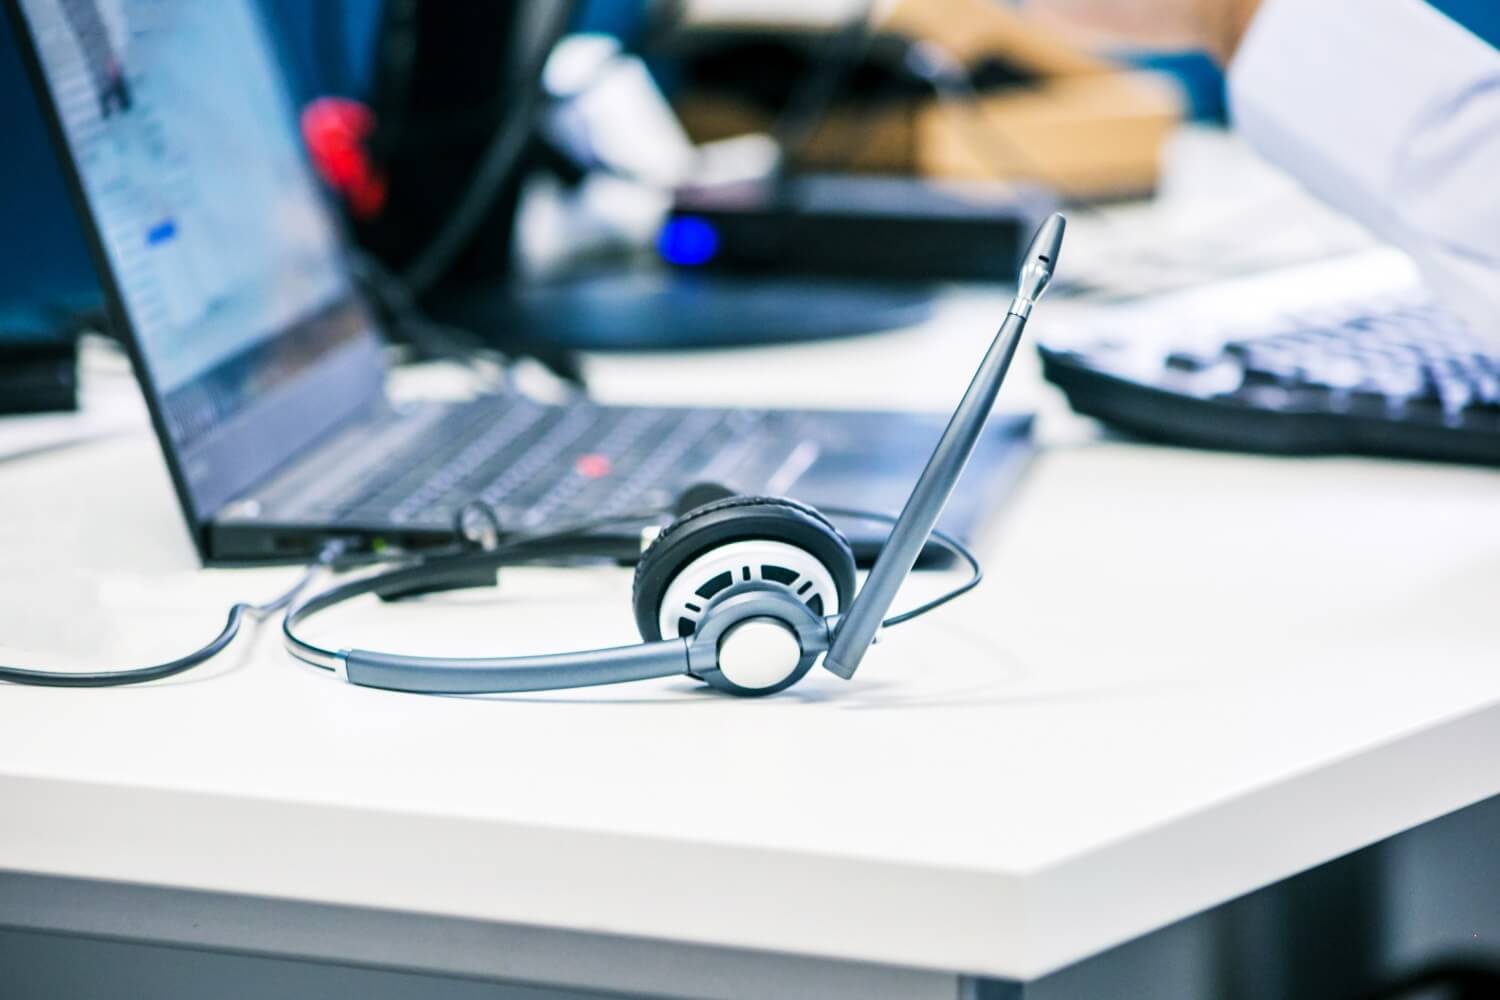 A headset and laptop on a desk